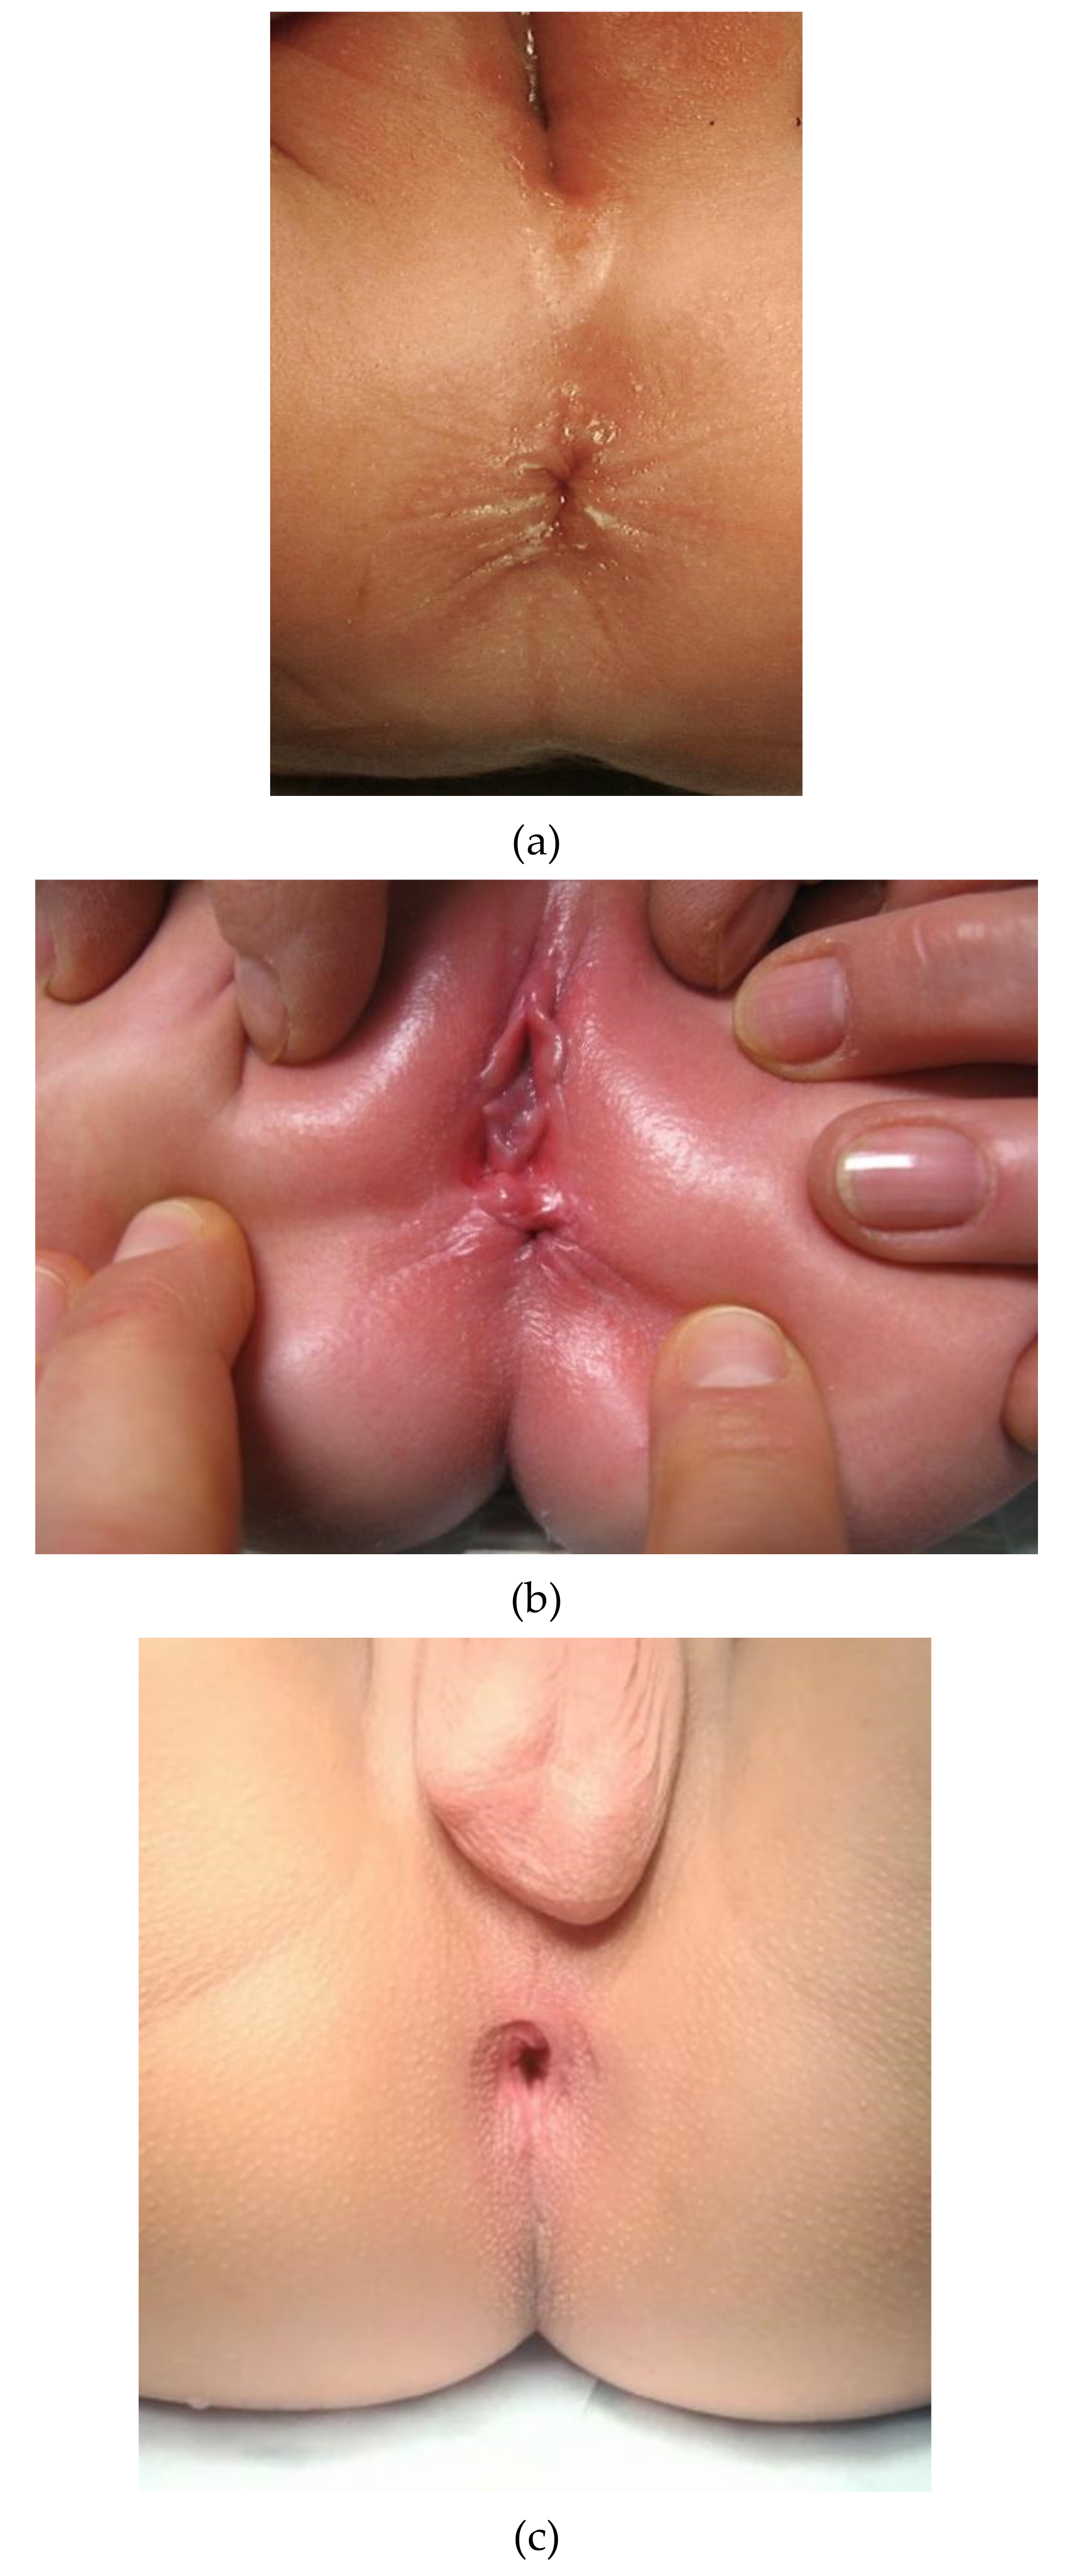 Children Free Full-Text Clinical Differentiation between a Normal Anus, Anterior Anus, Congenital Anal Stenosis, and Perineal Fistula Definitions and Consequencesandmdash;The ARM-Net Consortium Consensus image photo